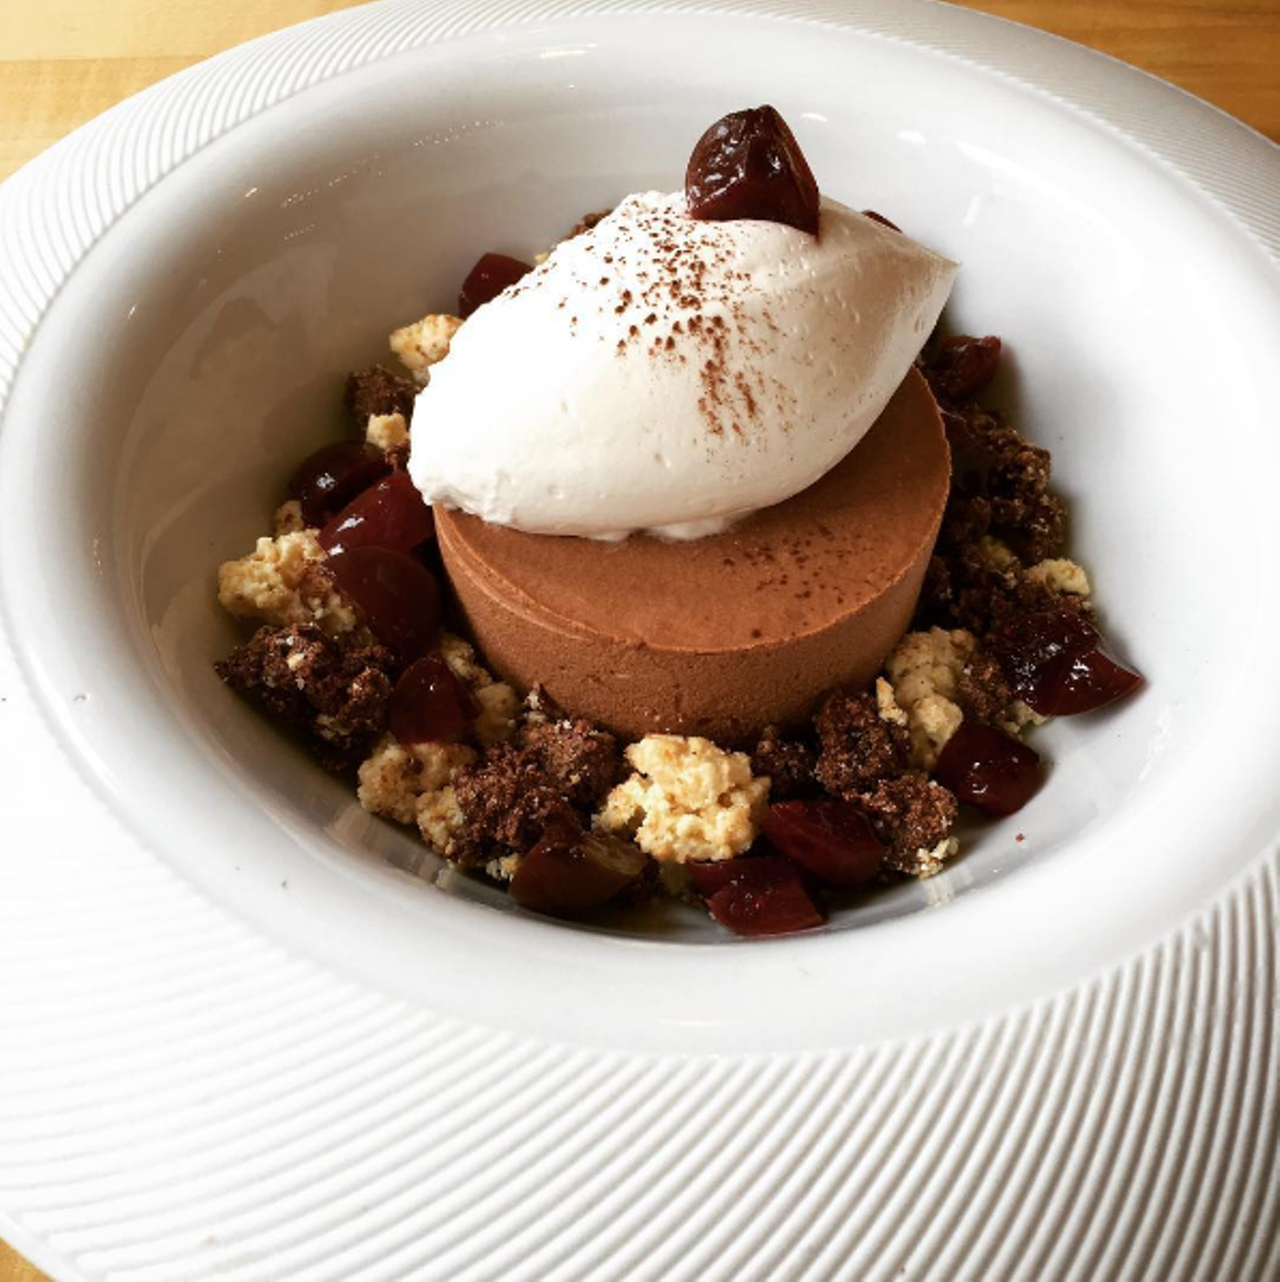 Chocolate Mousse Cake at Osprey Tavern
Beyond the dark and white chocolate crumble and cherry chantilly cream, the Luxardo cherries, which go for about $20 for a 14-ounce jar) are an upscale addition to this dessert.
4899 New Broad St., 407-960-7700
Photo via klcarlucci/Instagram